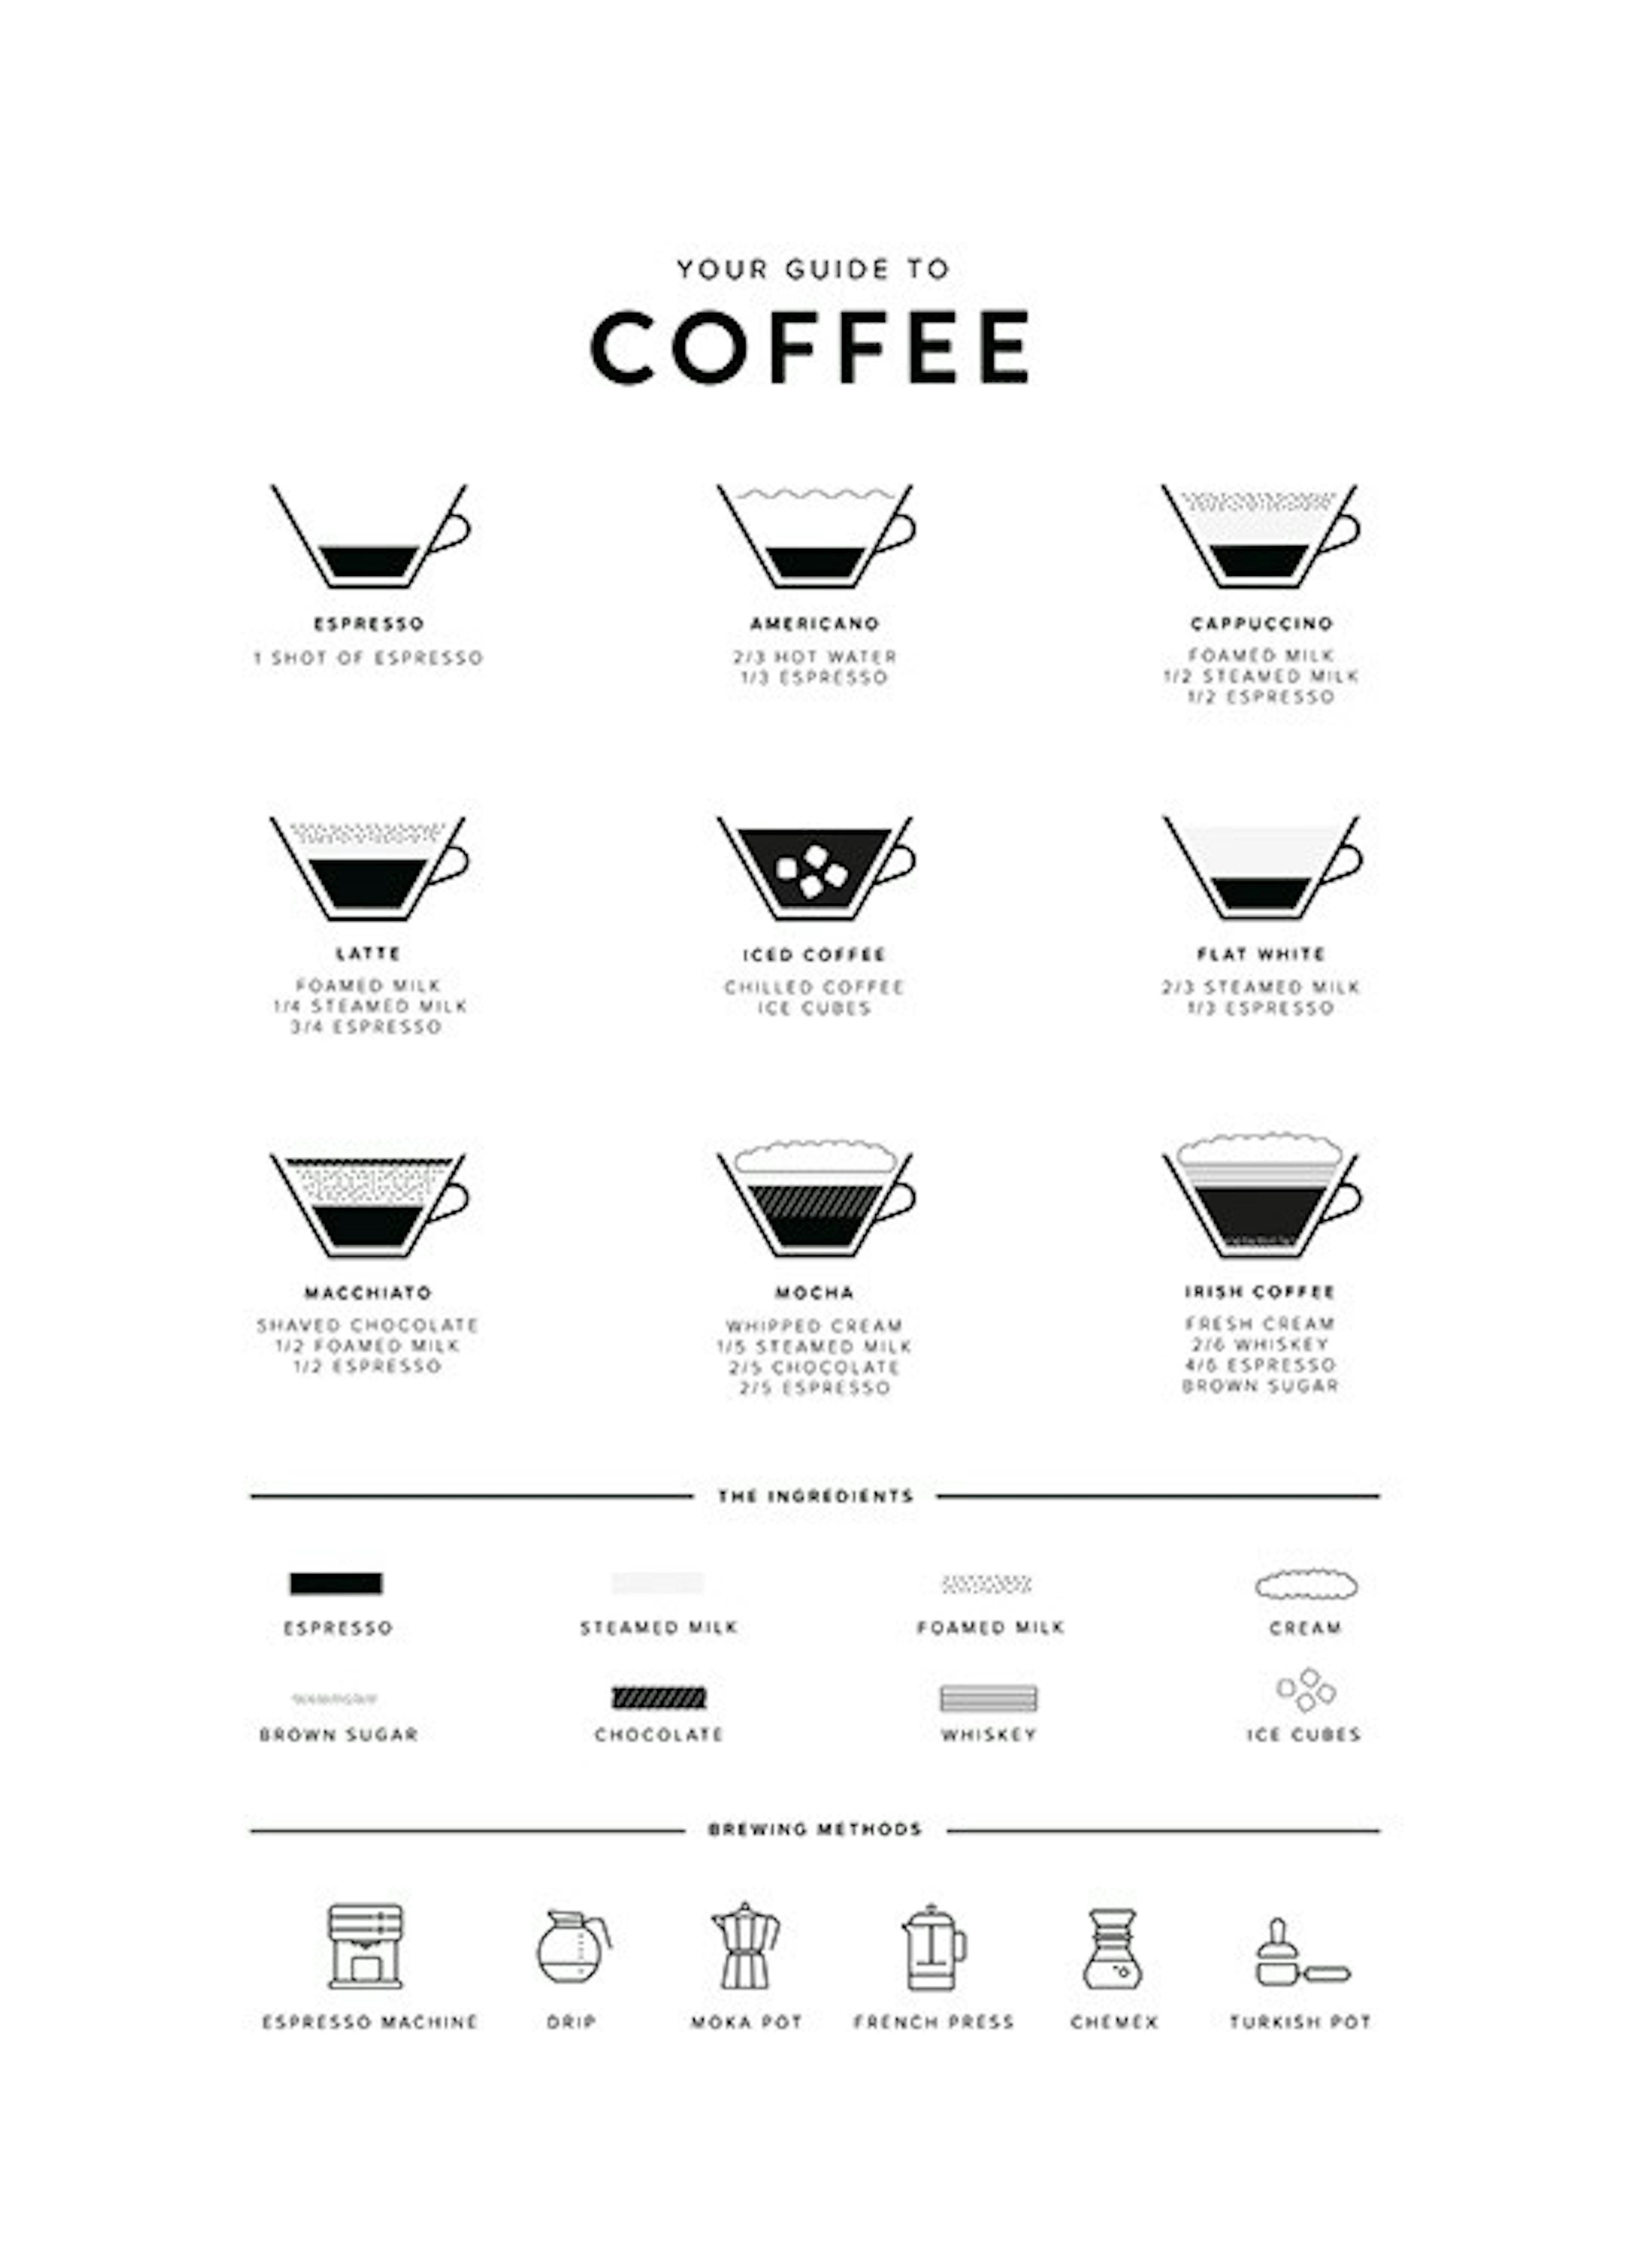 Your Guide to Coffee Print 0